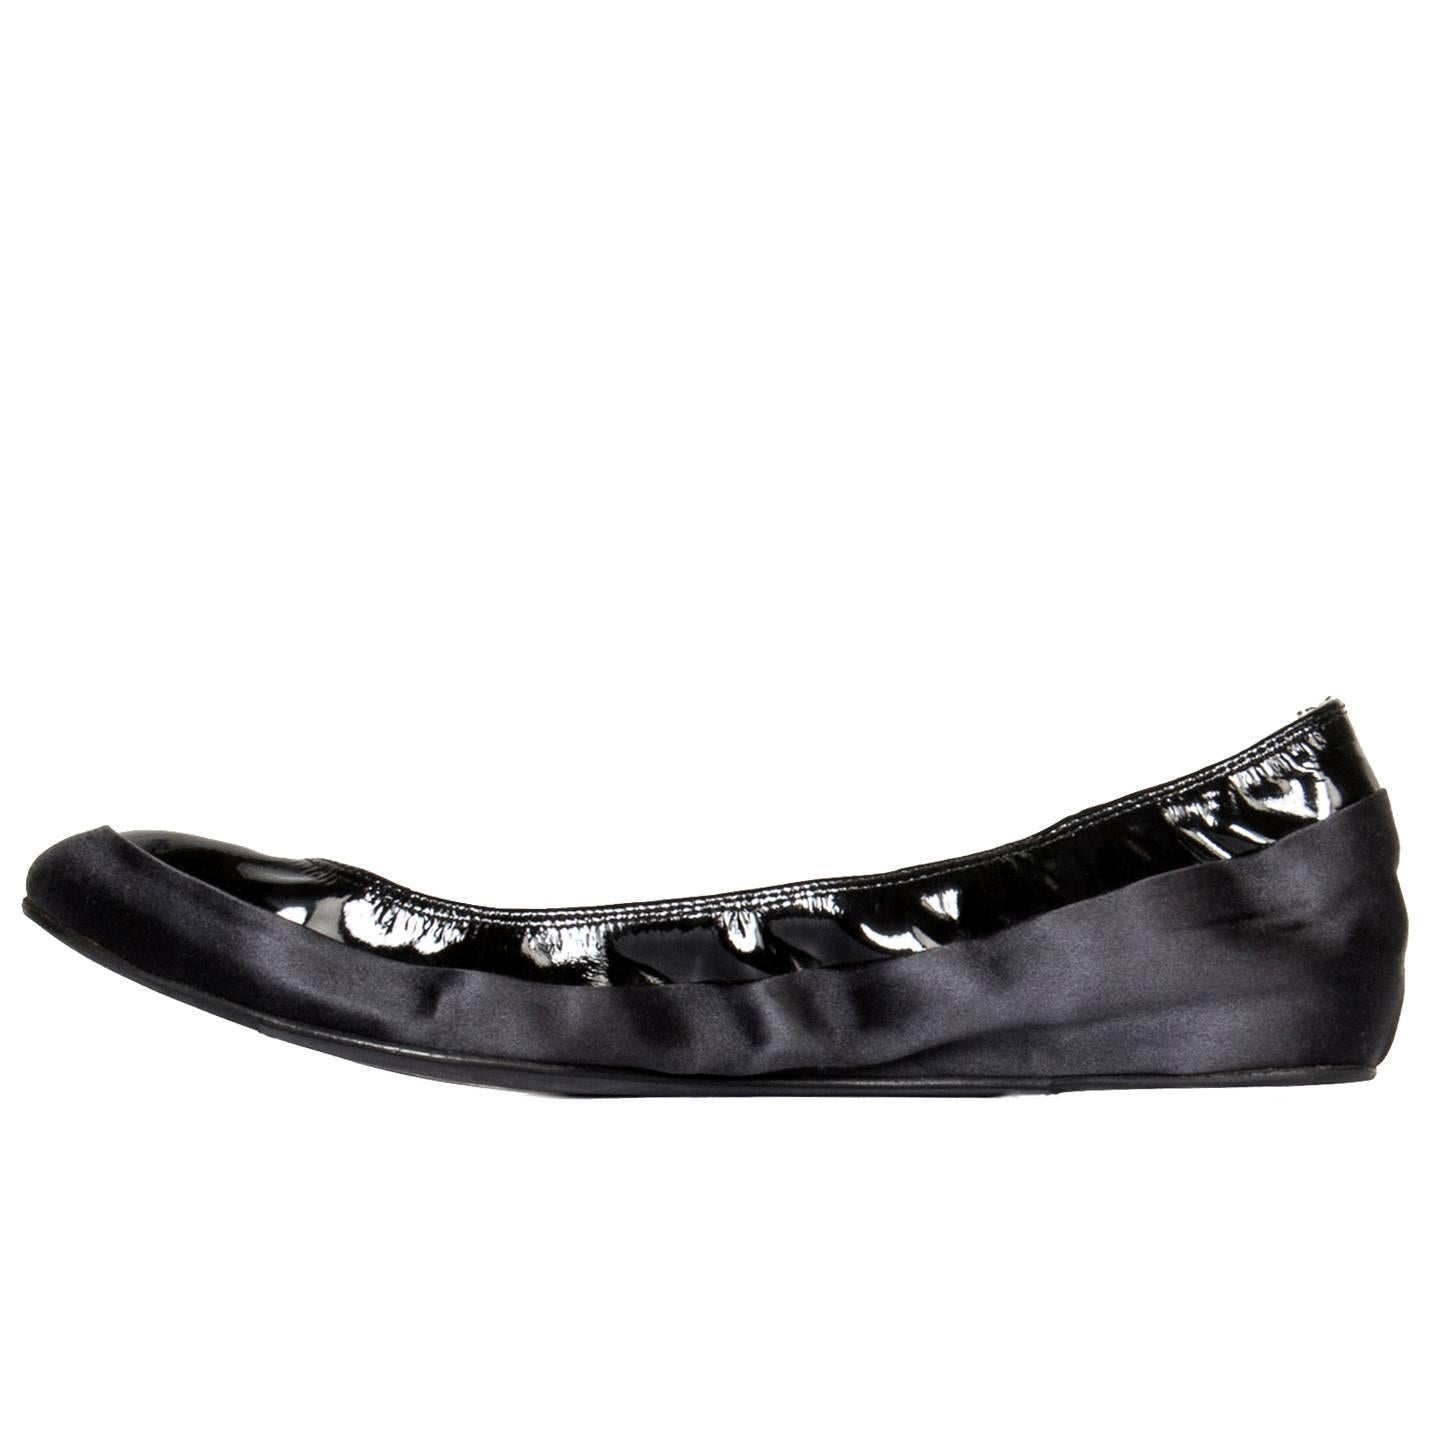 Lanvin Black Satin & Patent Leather Ballerinas In New Condition For Sale In Brooklyn, NY